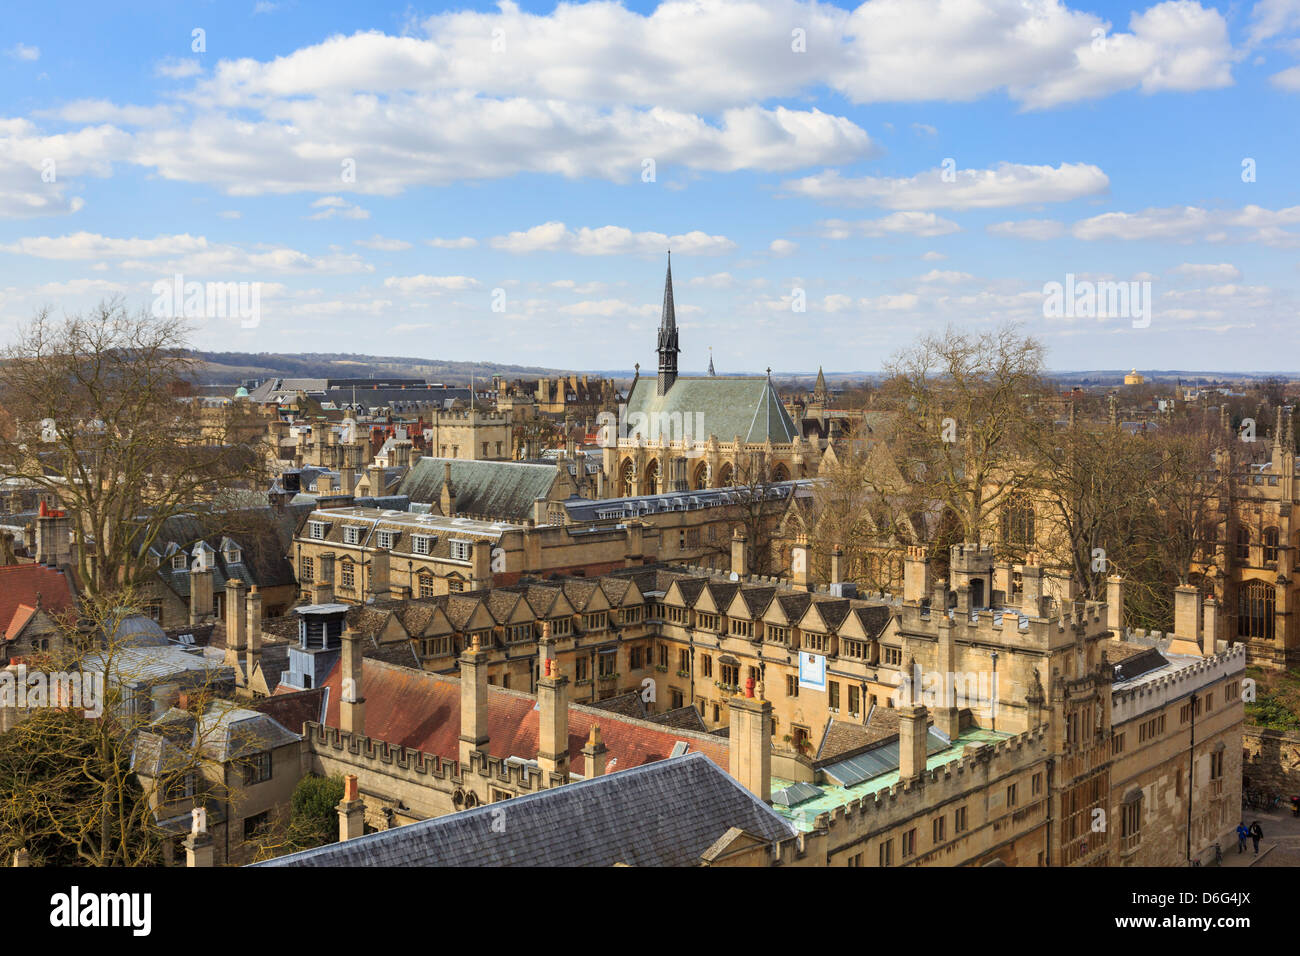 Oxford, Oxfordshire, England, UK. City skyline and Brasenose College from University Church of St Mary the Virgin's tower Stock Photo